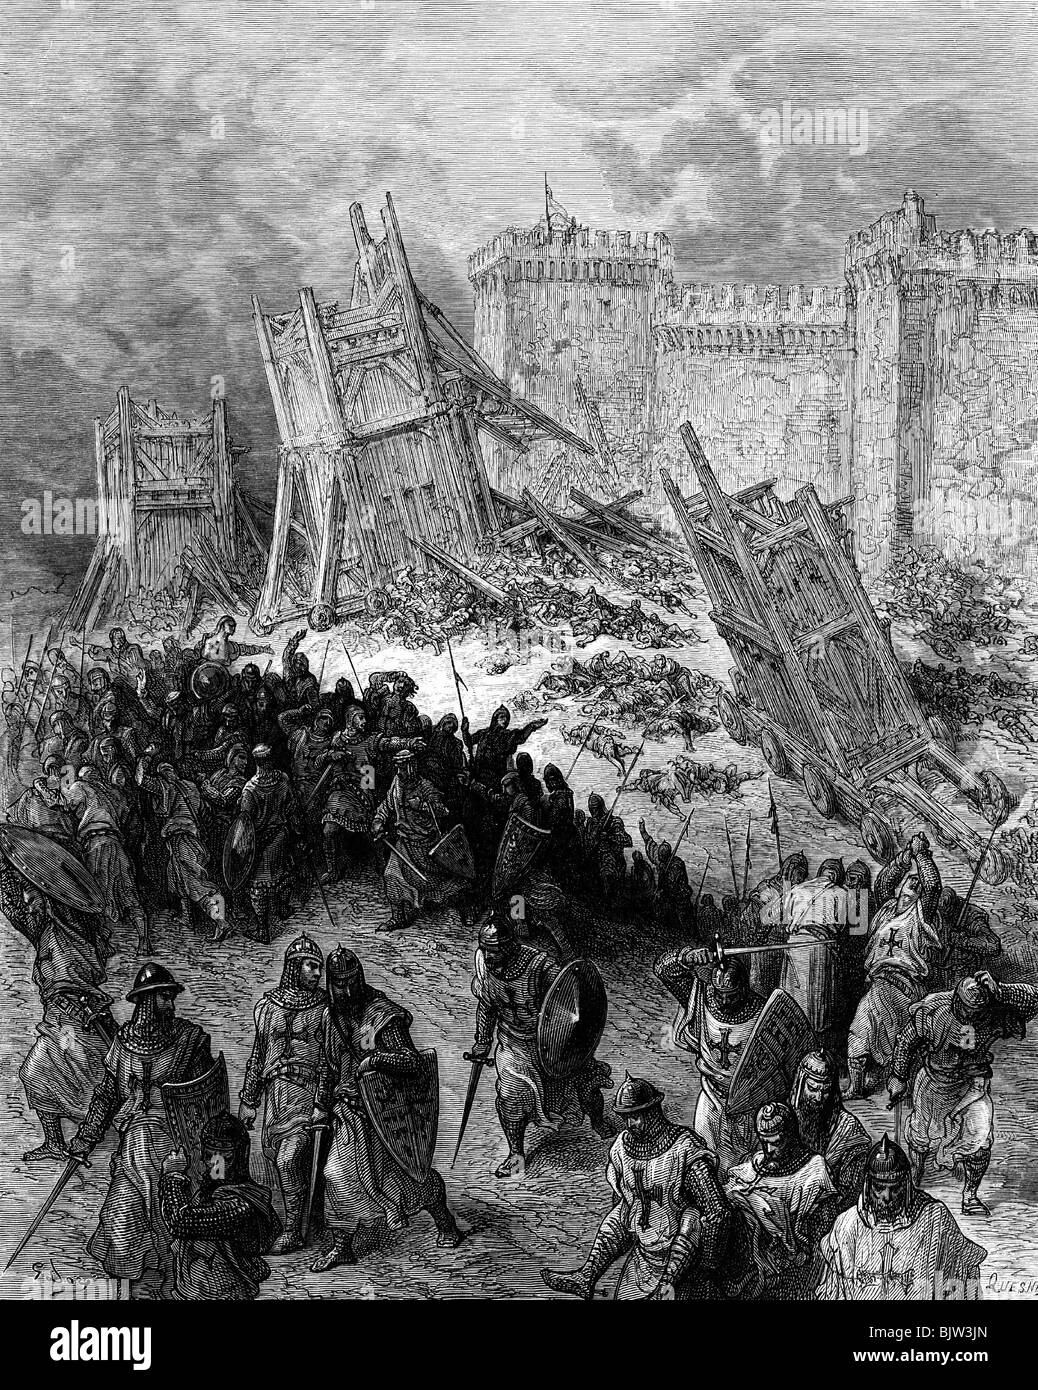 Middle Ages, crusades, First Crusade 1096 - 1099, siege of Jerusalem, 7.6. - 15.7.1099, the repelled attack of 13.6.1099, wood engraving by Quesnel after drawing by Gustav Dore, to: Joseph Francois Michaud 'Histoire des croisades', 1875, Artist's Copyright has not to be cleared Stock Photo